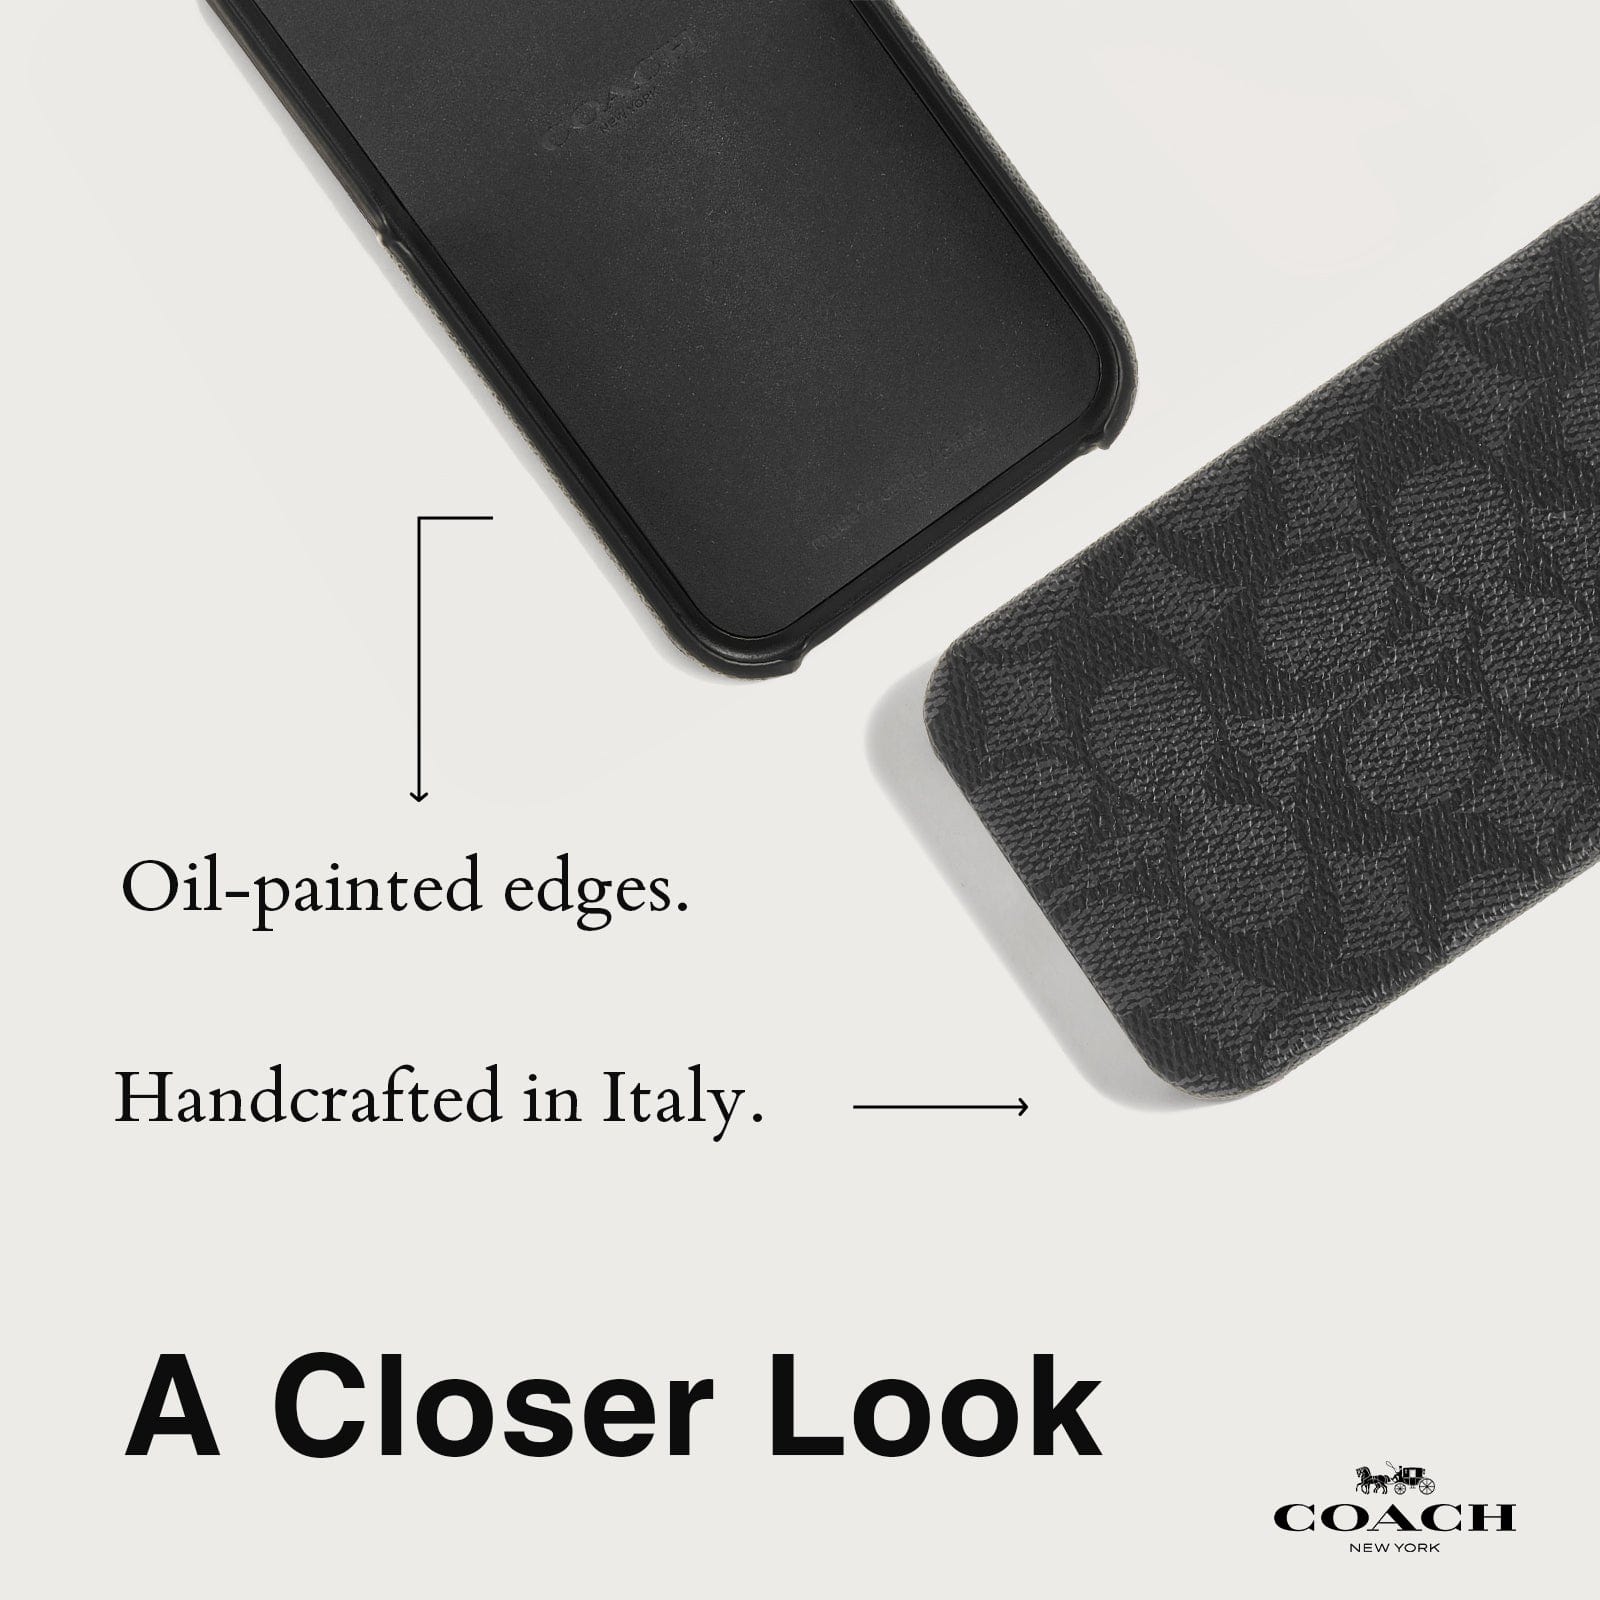 OIL PAINTED EDGES. HANDCRAFTED IN ITALY. A CLOSER LOOK